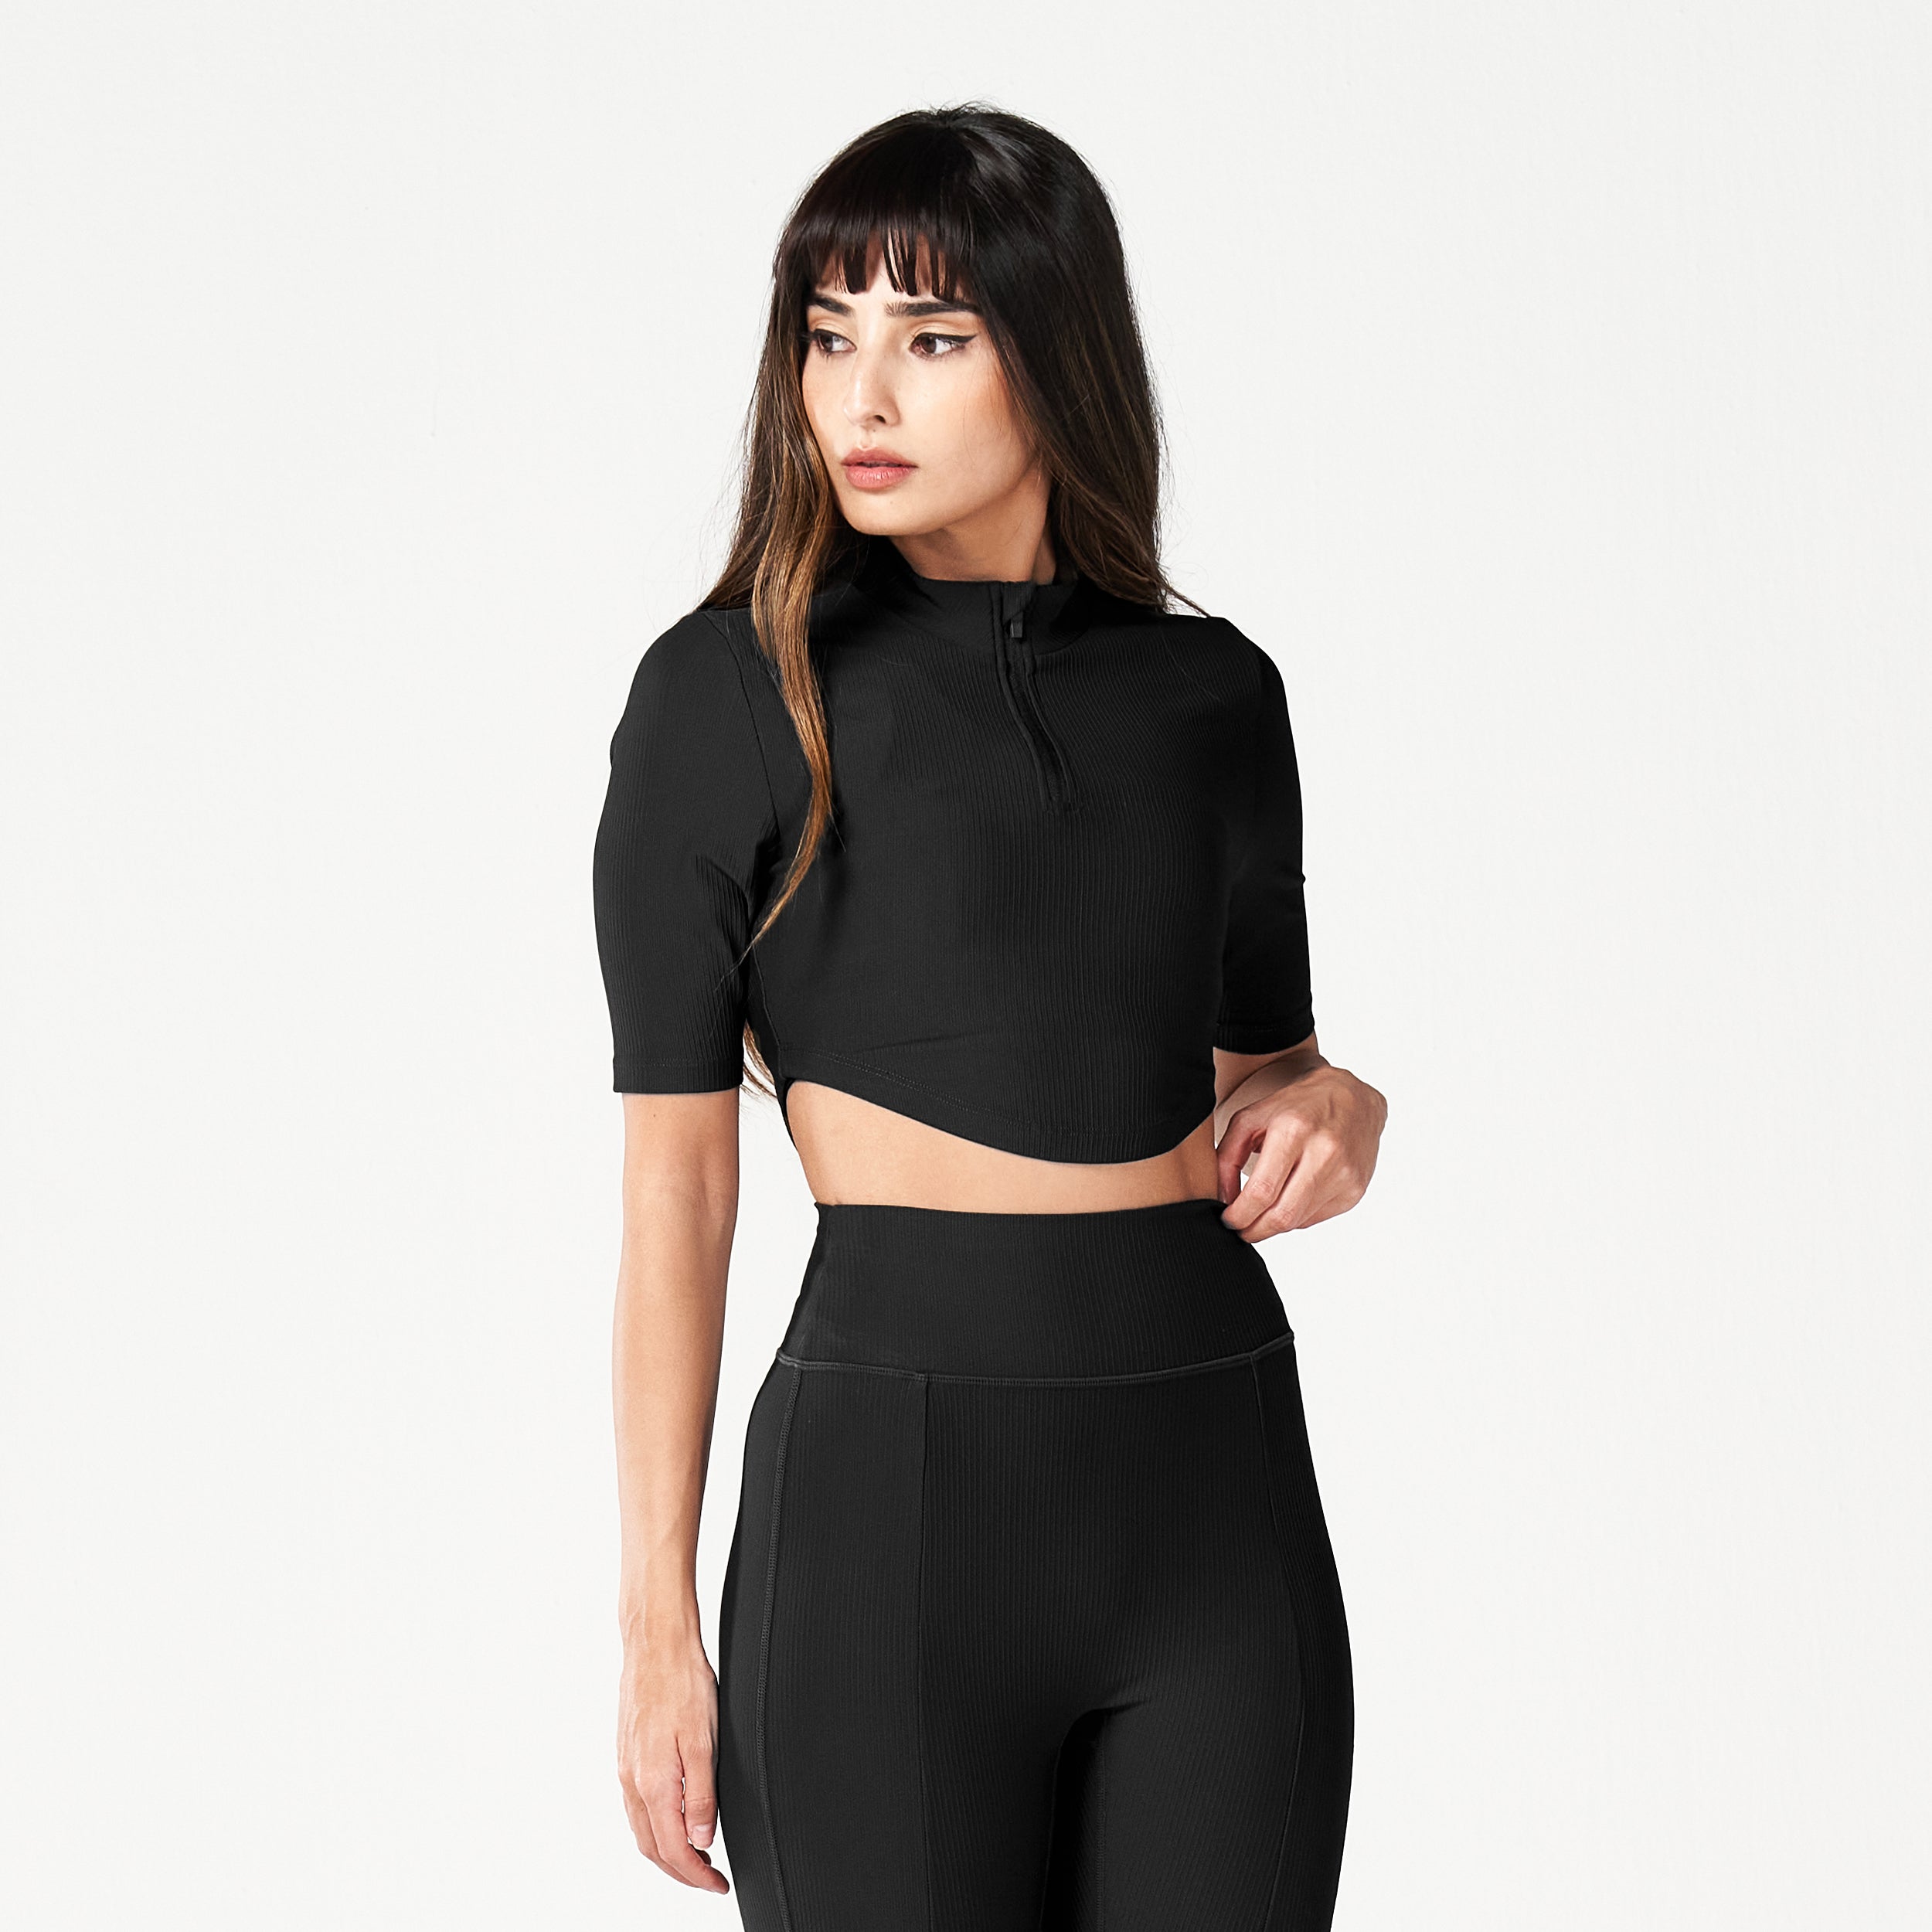 AE | Code Ribbed Crop Top - Black | Workout Shirts Women | SQUATWOLF